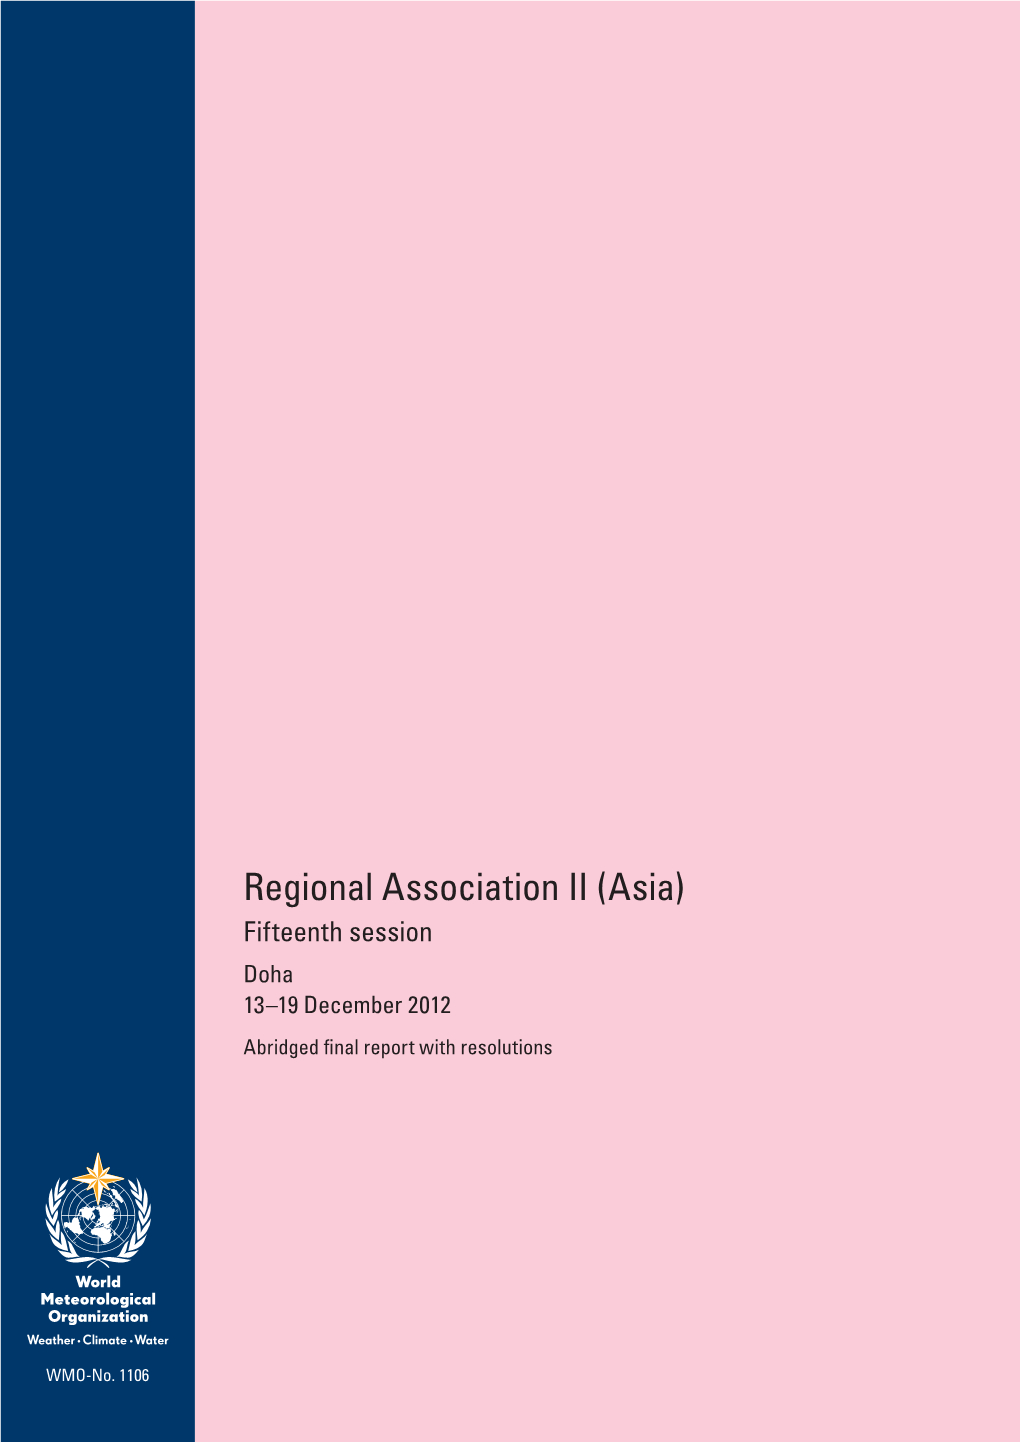 Asia) Fifteenth Session Doha 13–19 December 2012 Abridged Final Report with Resolutions